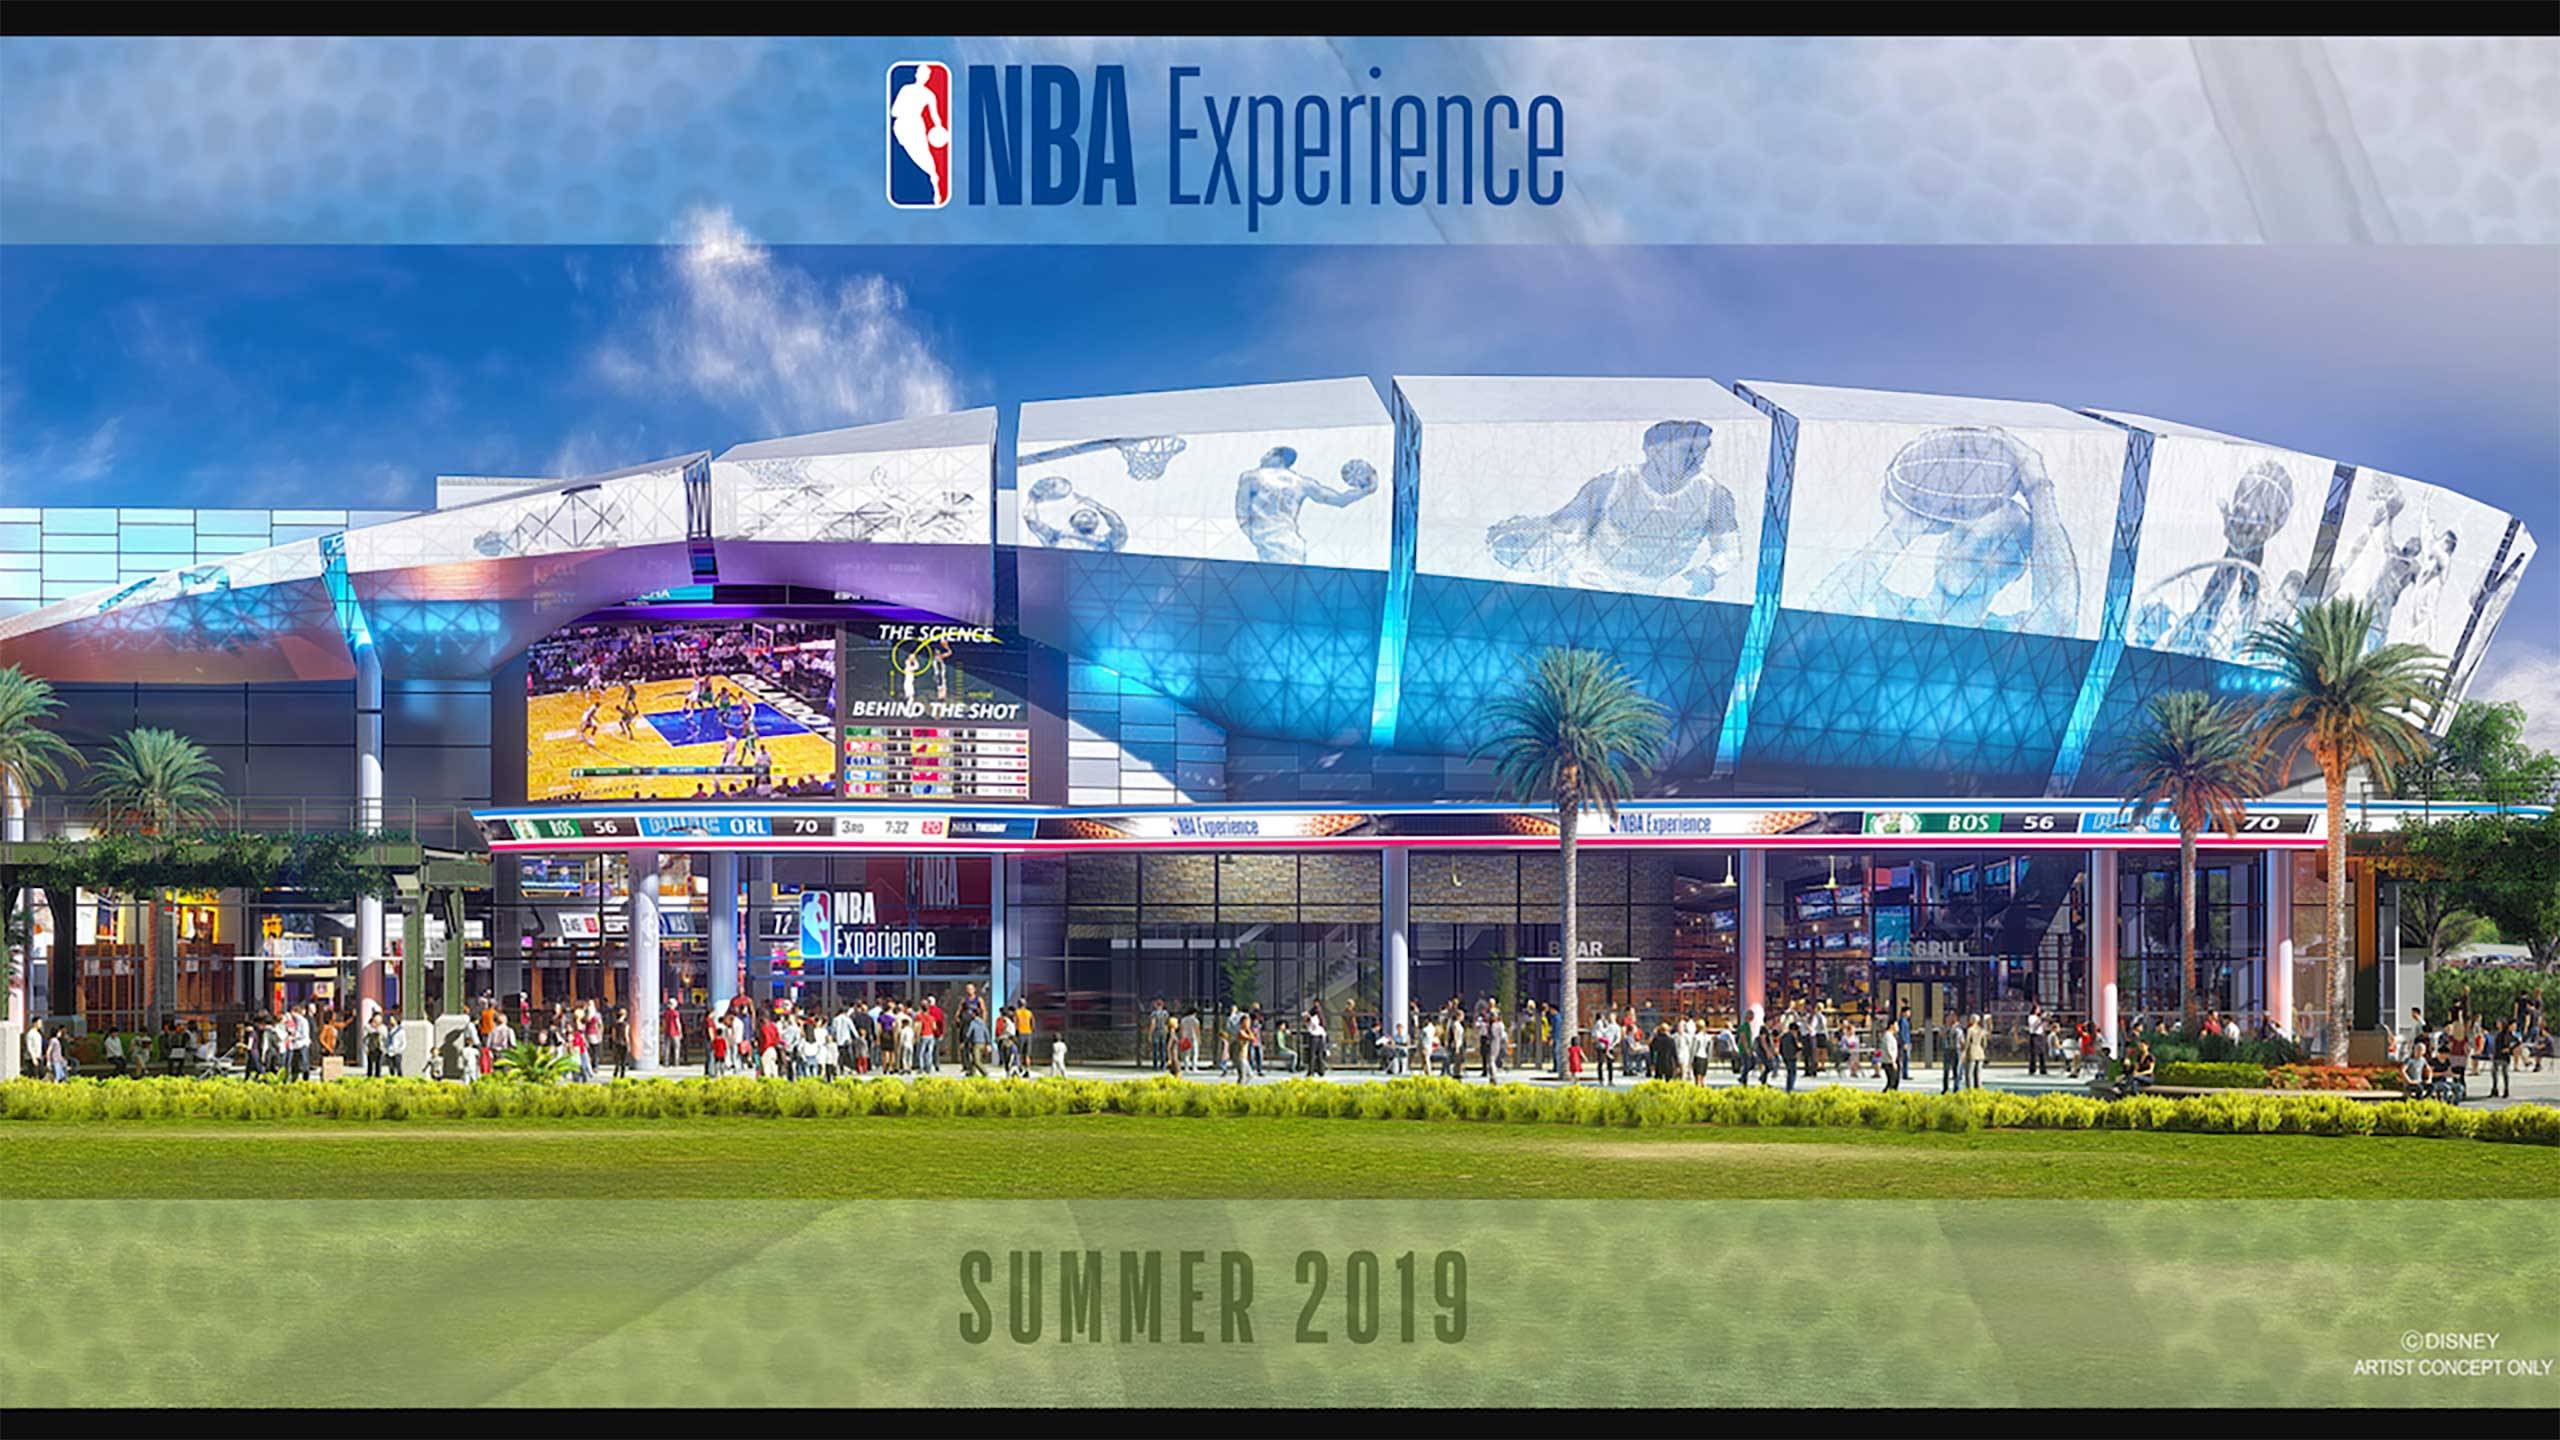 The NBA Experience